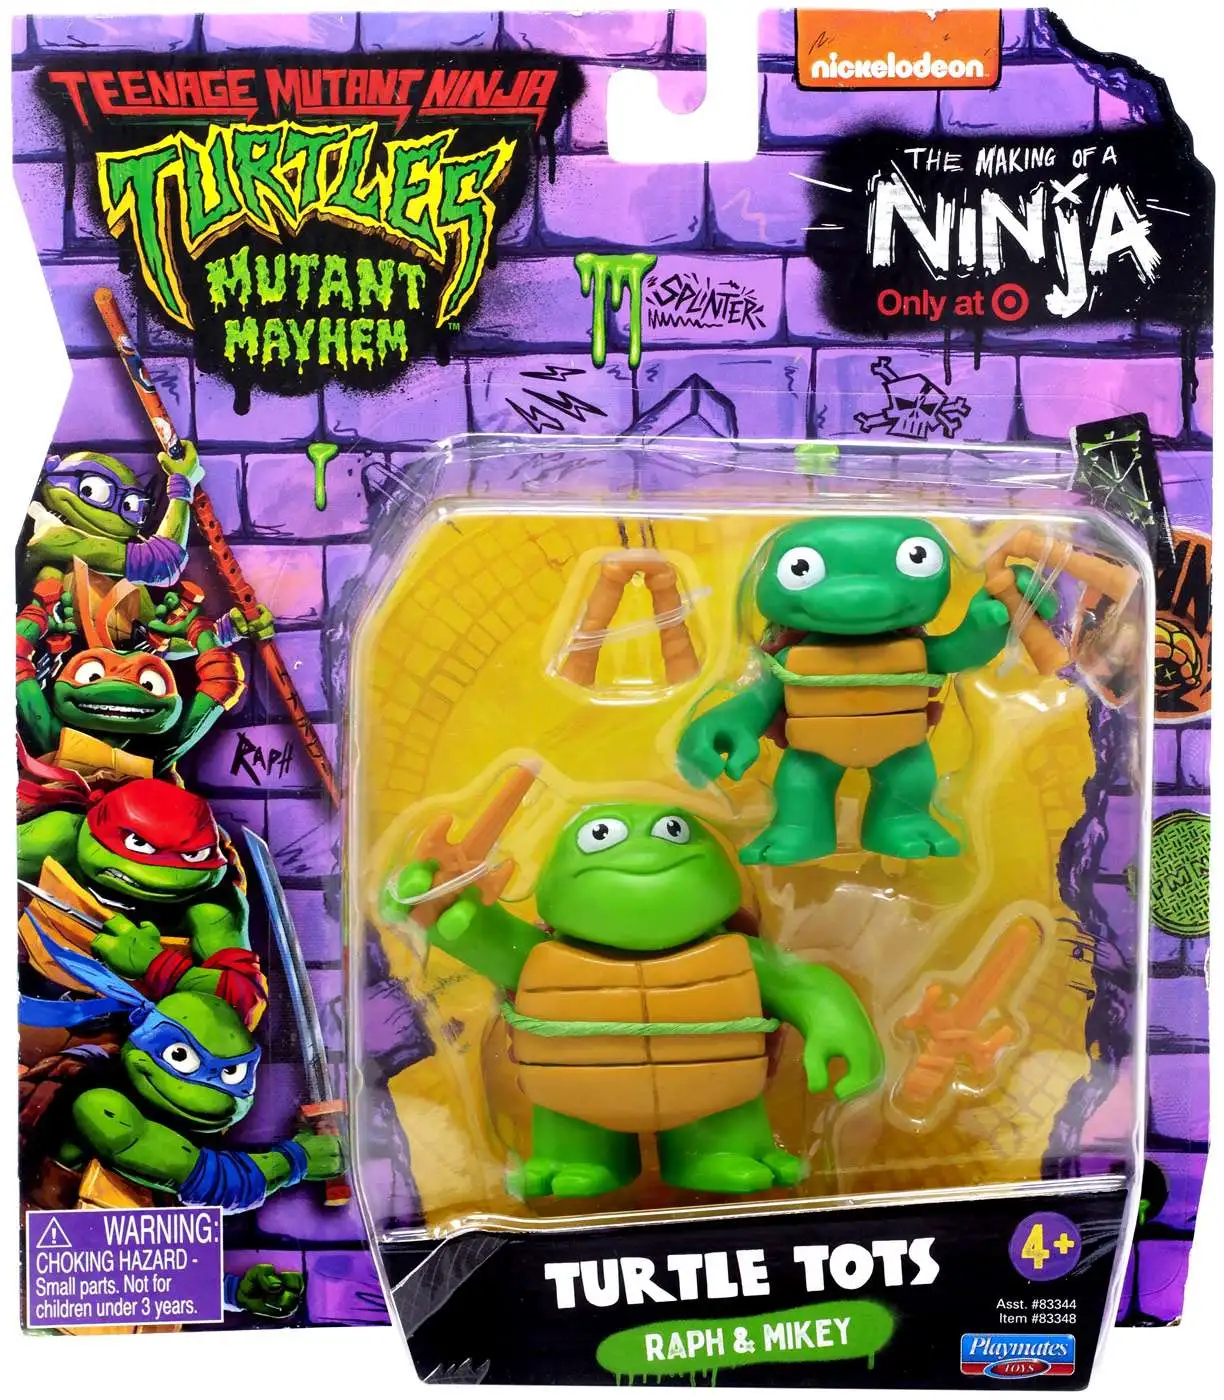 Ninja Turtle Truck Toy Sold With 3 Figures